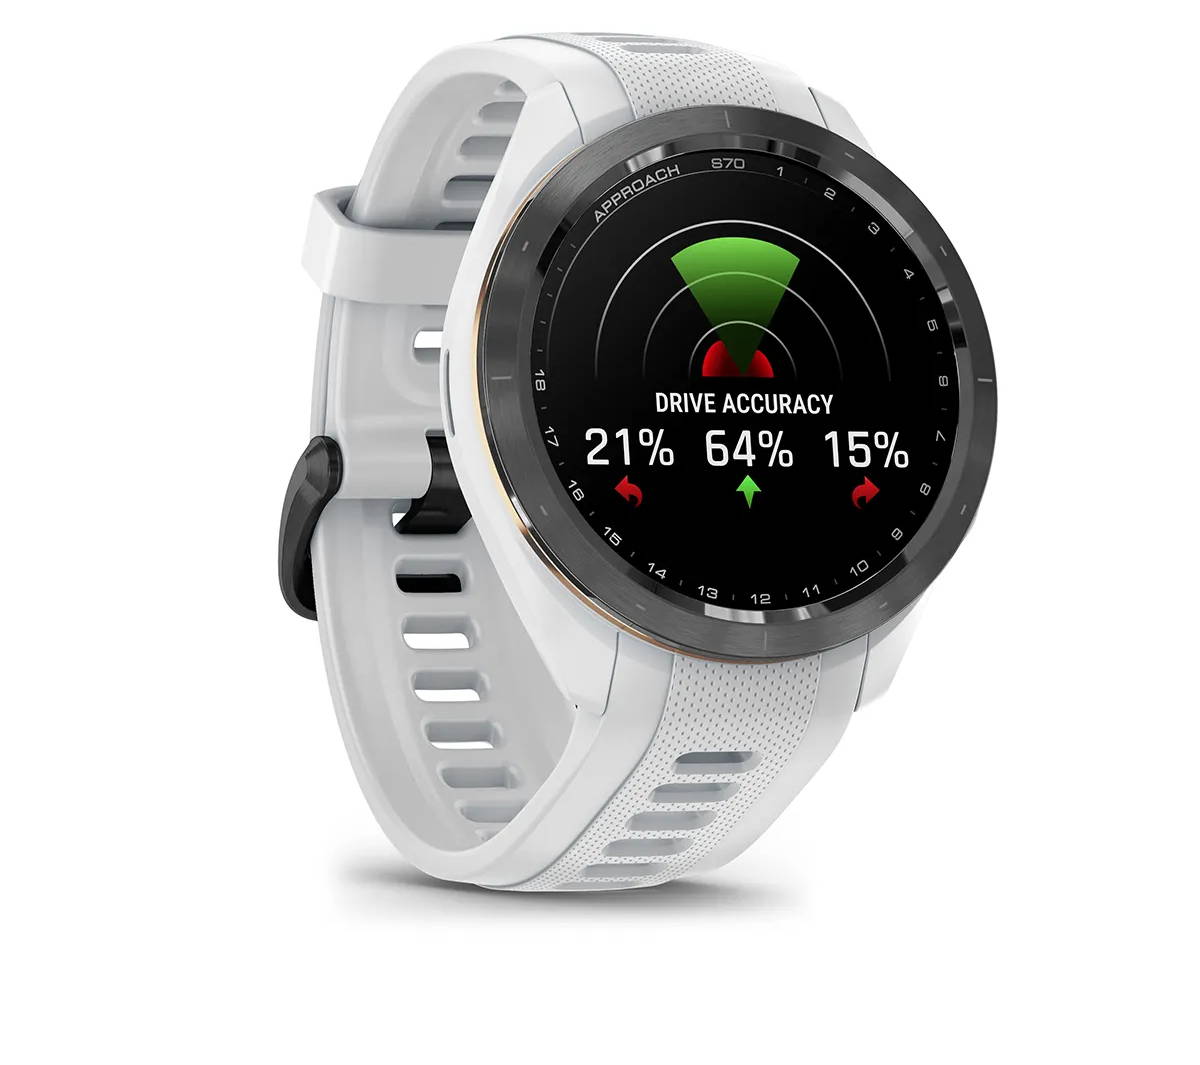 White Garmin Approach S70 golf GPS watch with drive accuracy data on the AMOLED screen